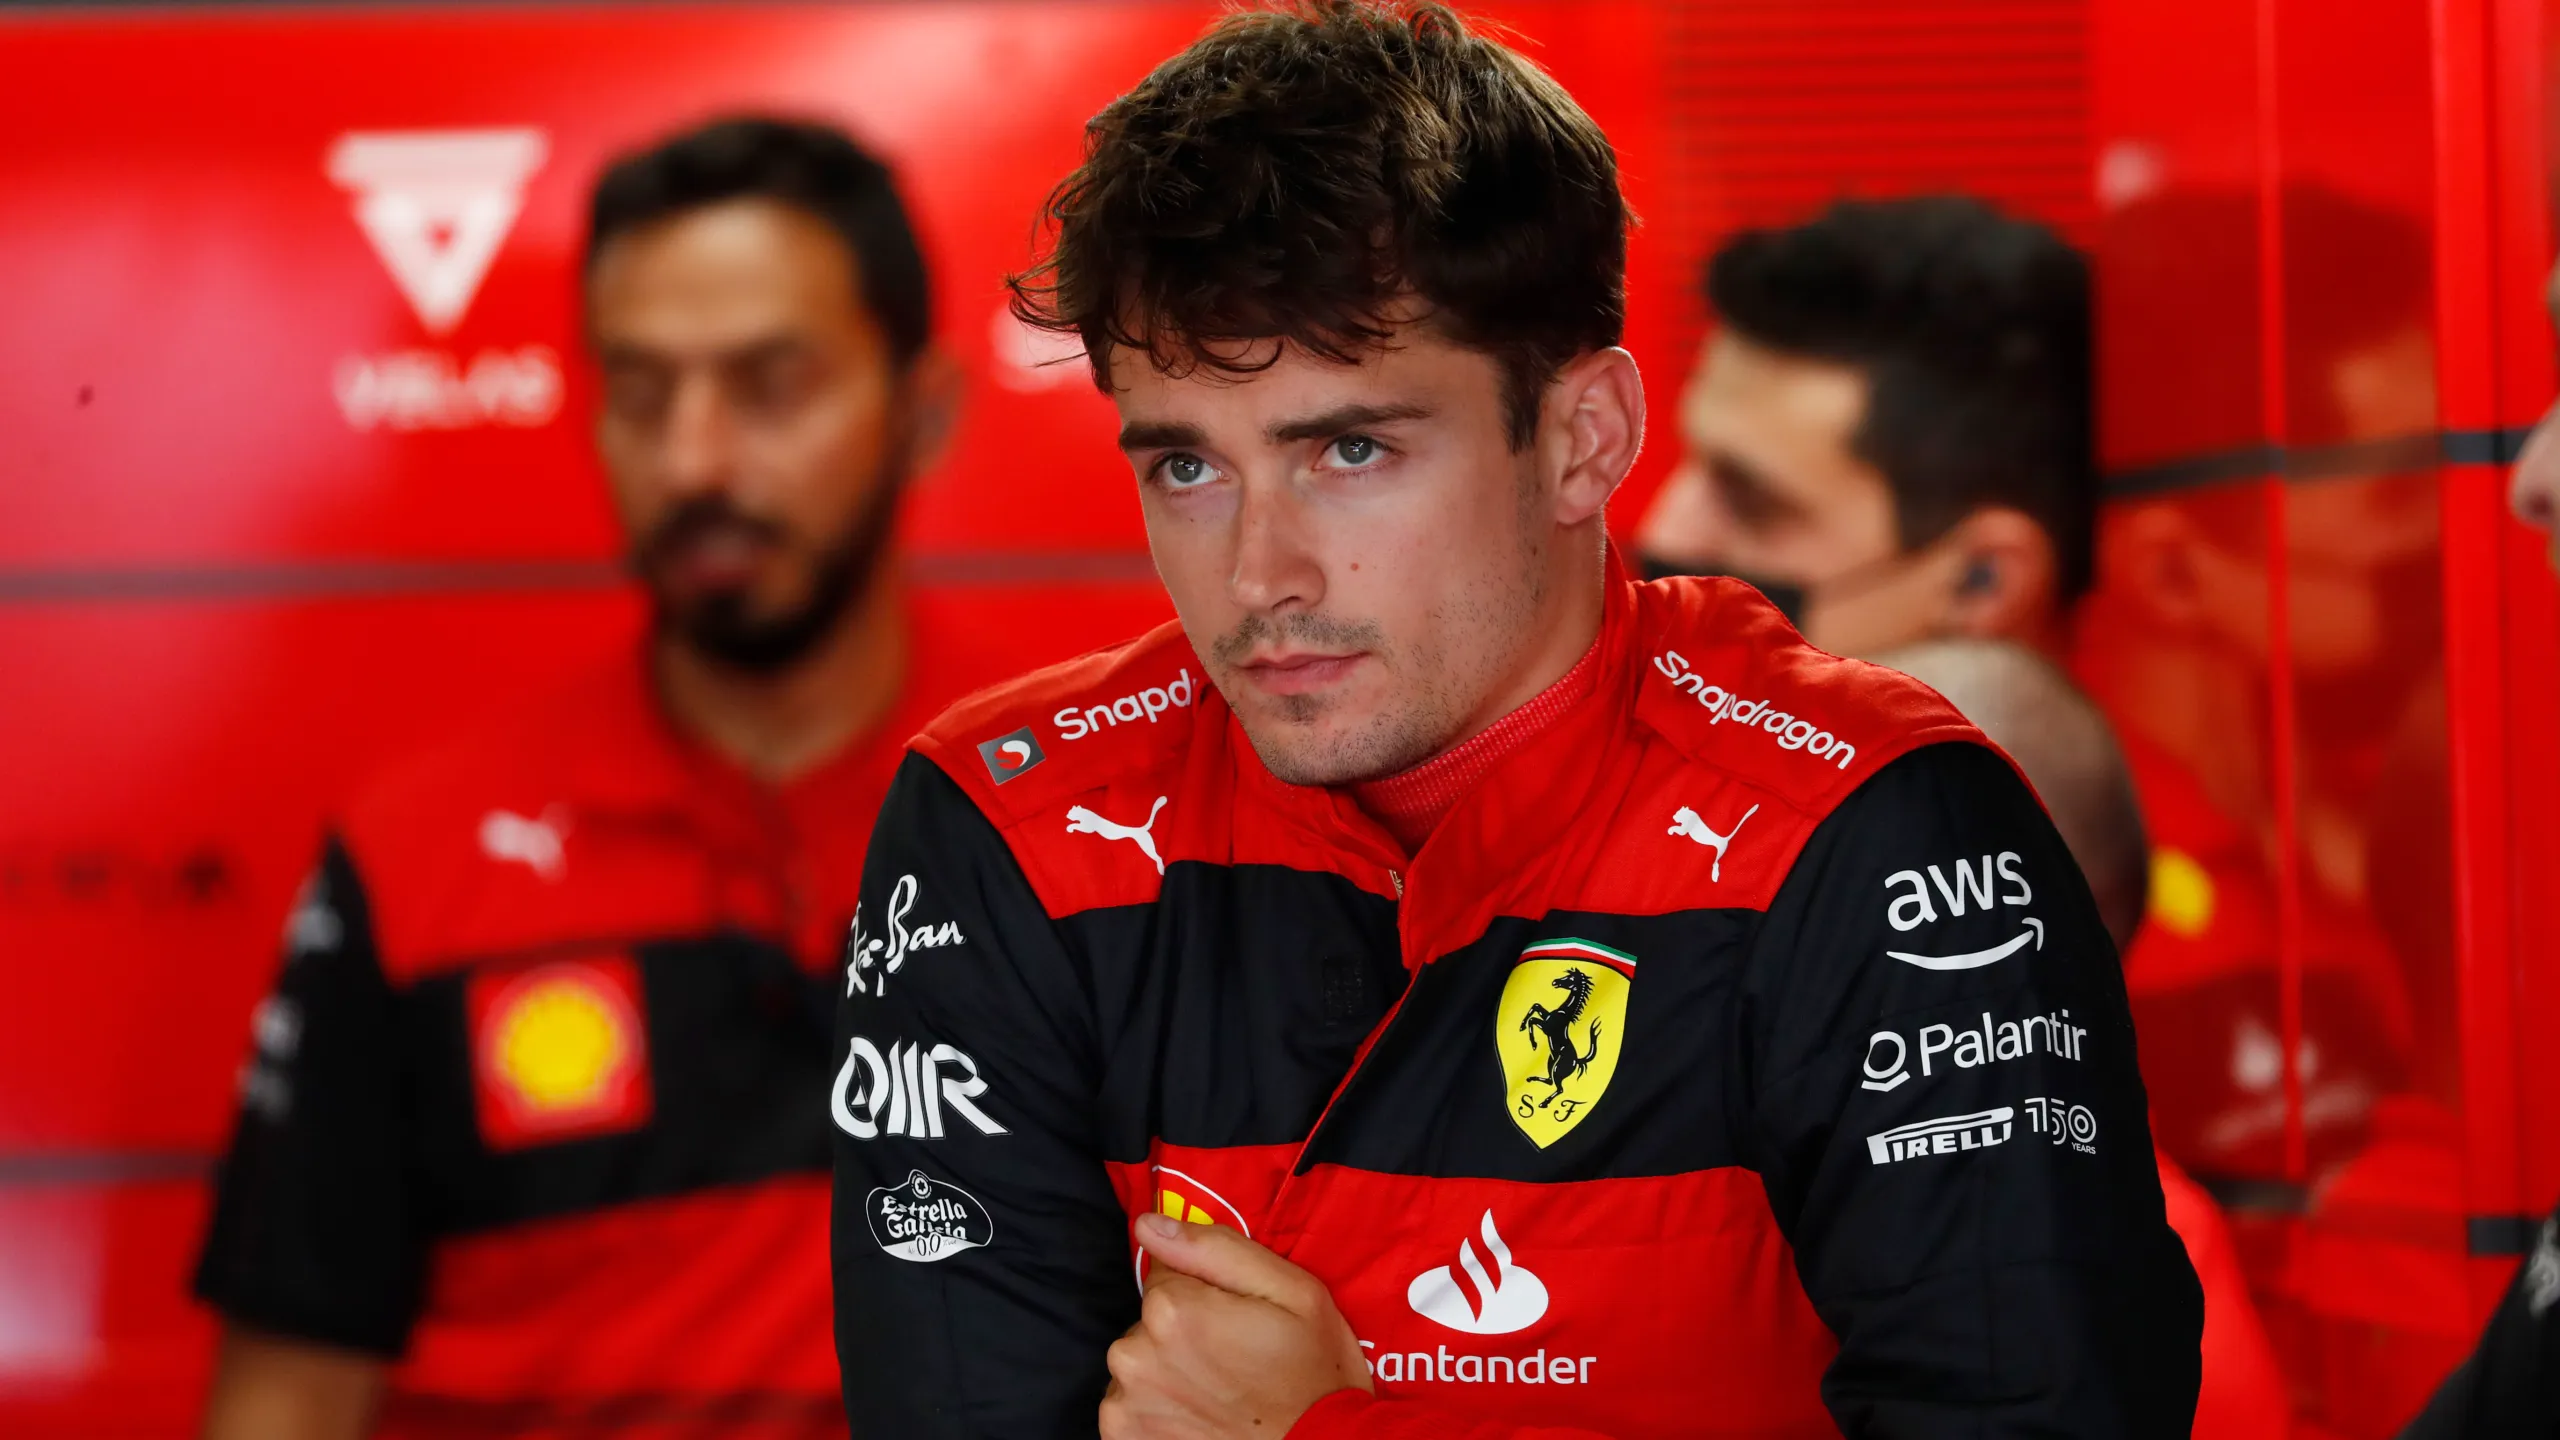 BREAKING NEWS: Charles Leclerc a Driver of Ferrari Just Announced His Departure Due To…….